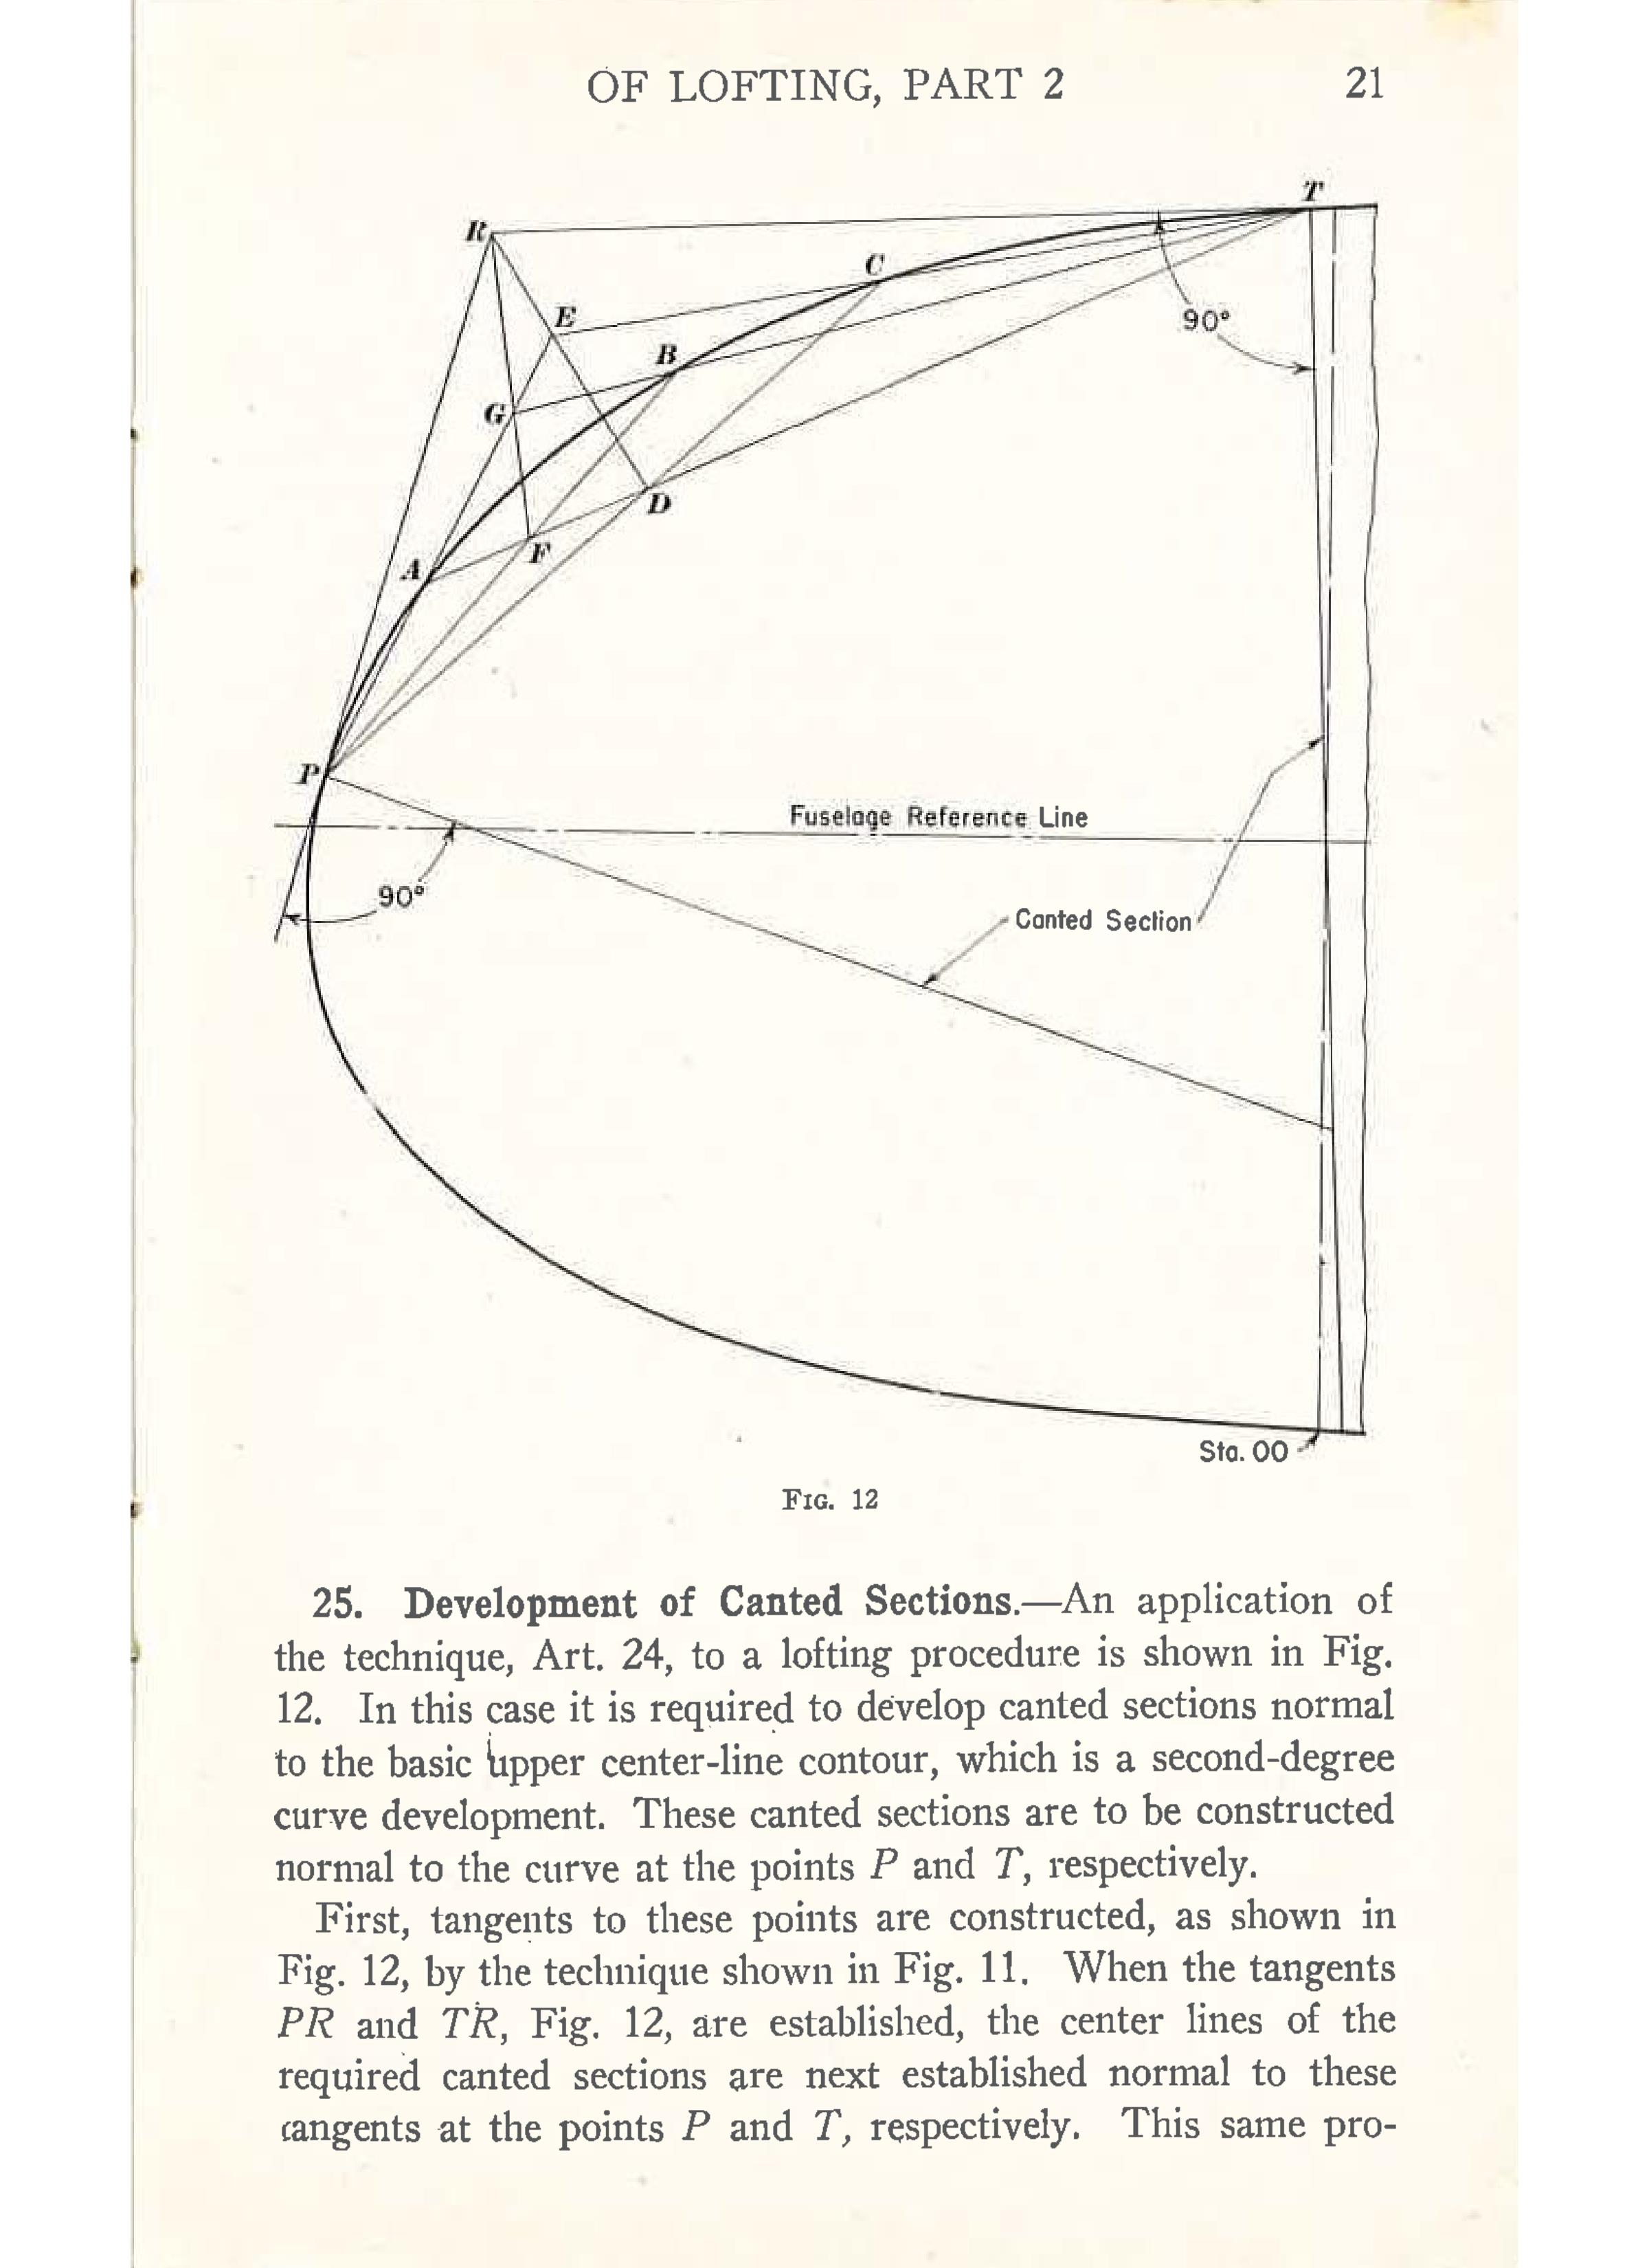 Sample page 23 from AirCorps Library document: Mathmatical Technique of Lofting - Part 2 - Bureau of Aeronautics